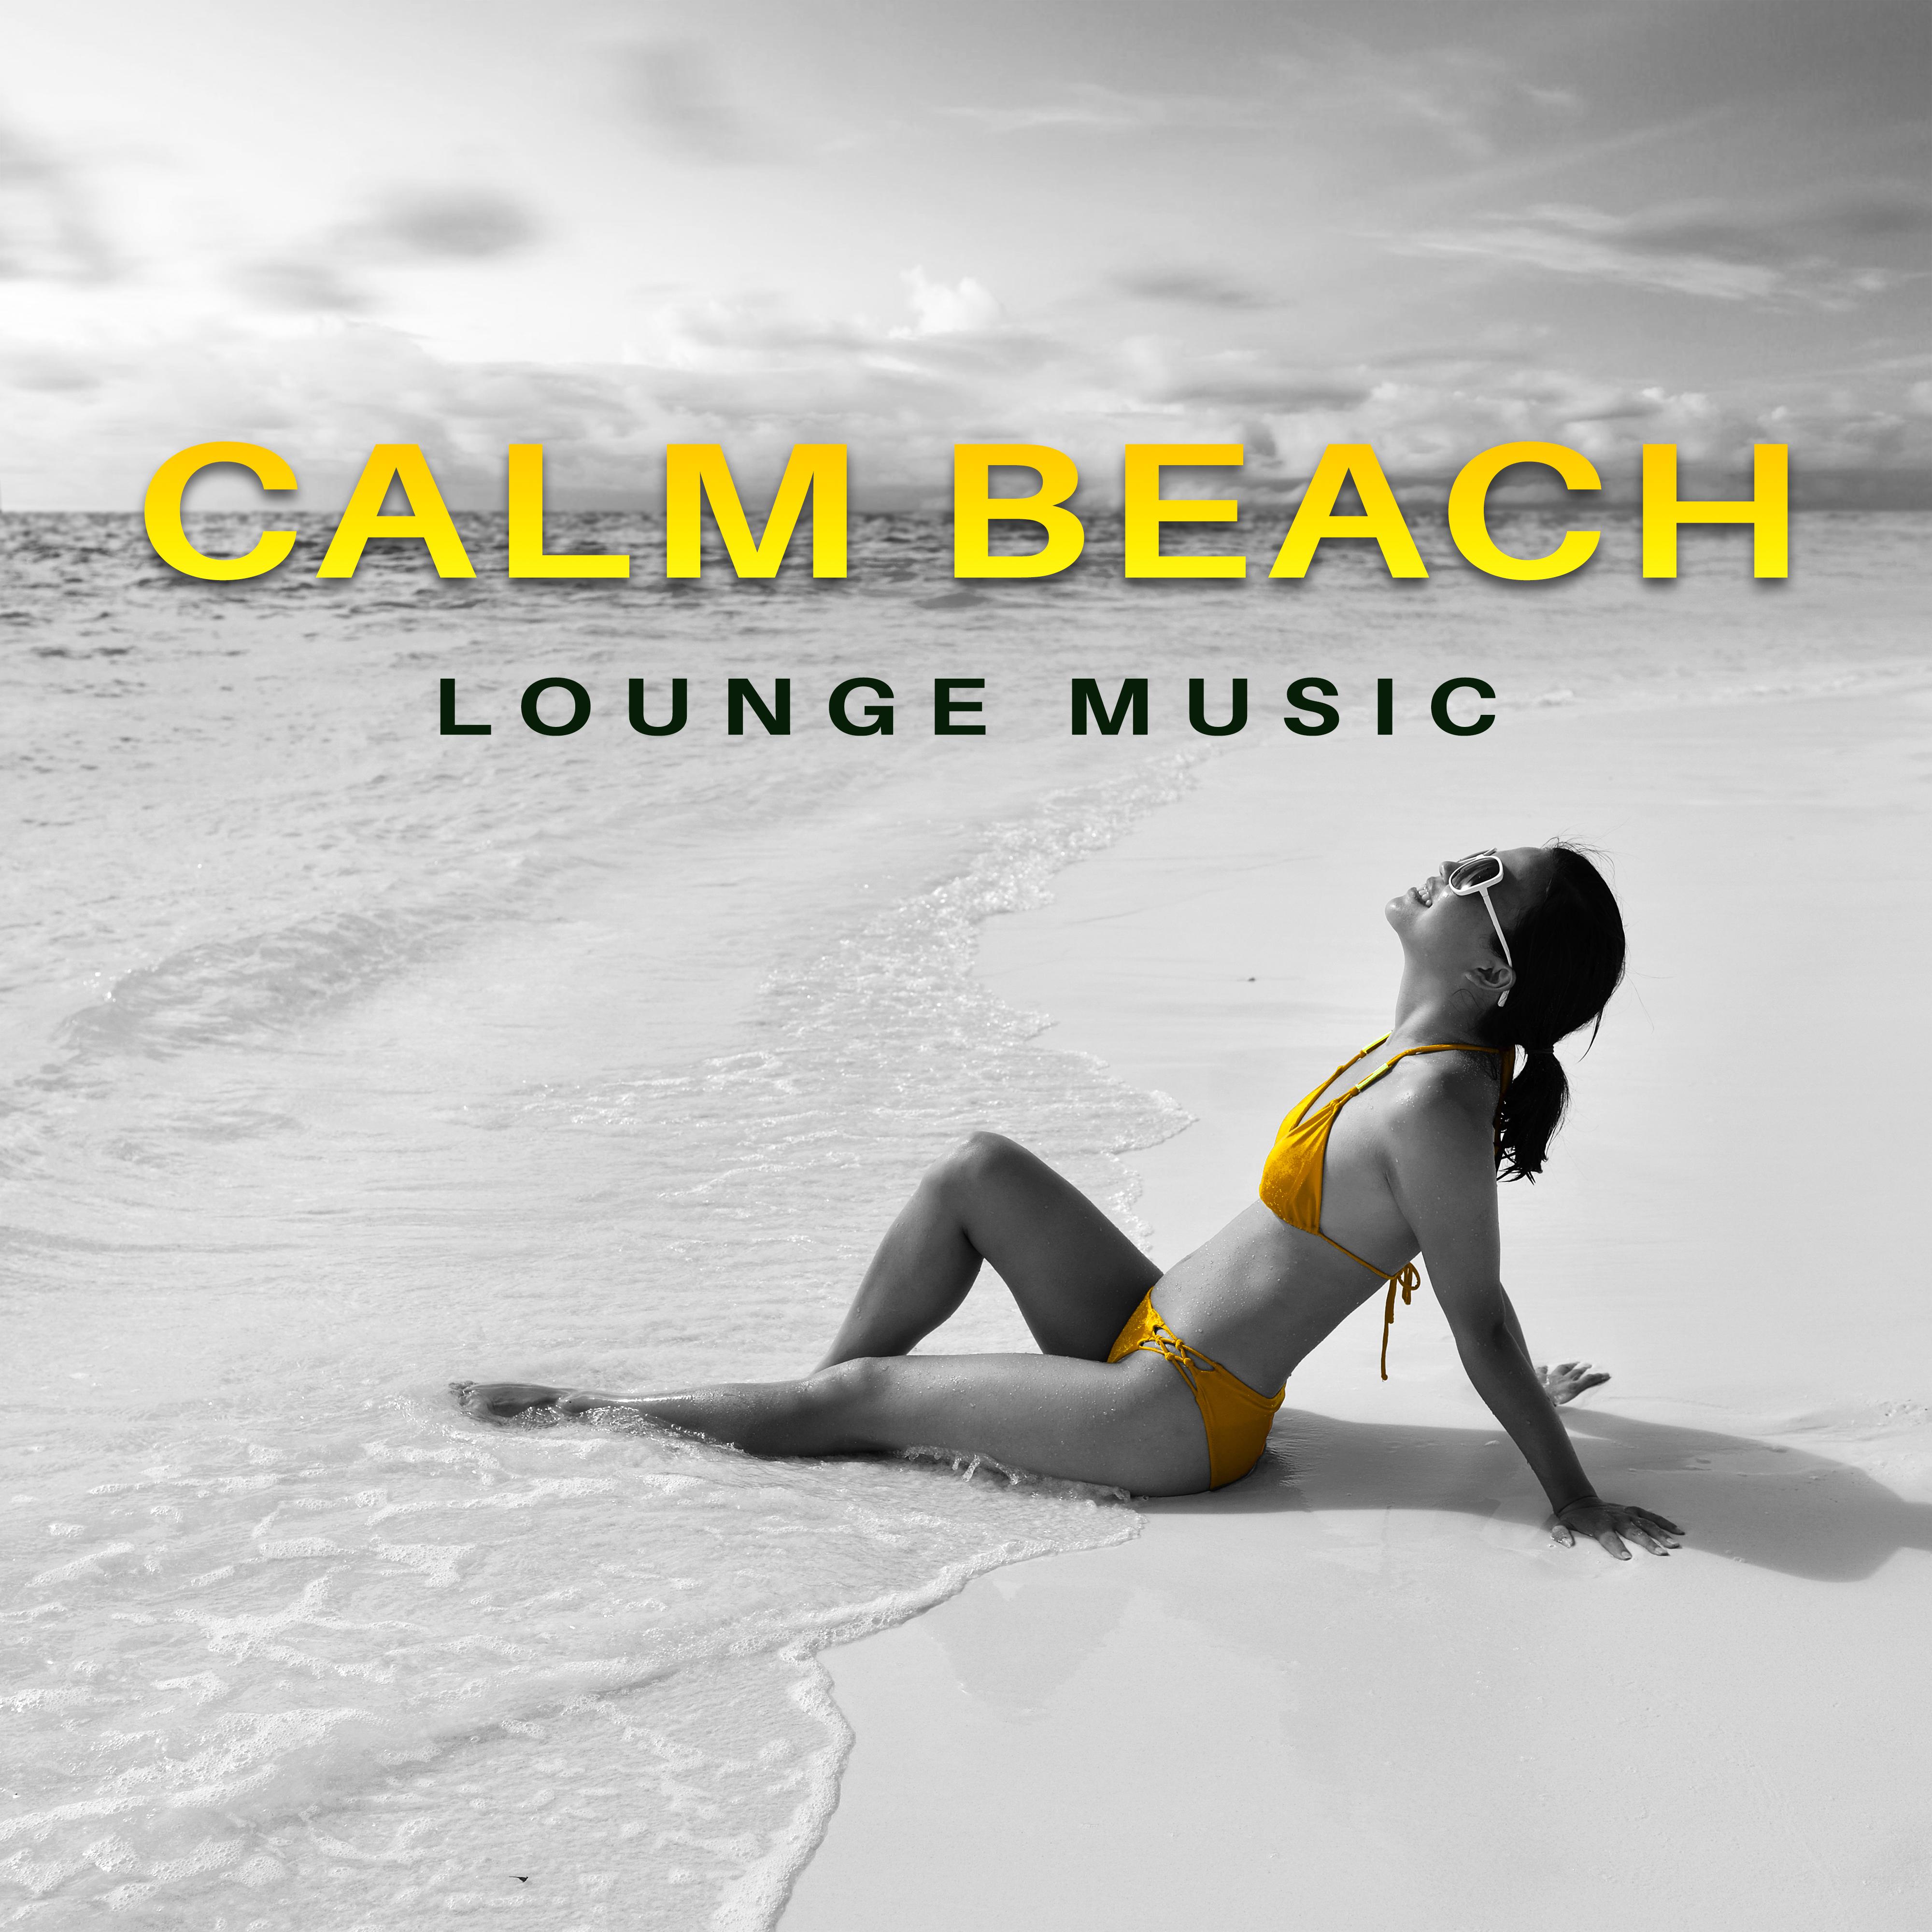 Calm Beach Lounge Music – Easy Listening, Chill Out Beats, Stress Relief, Summertime Music